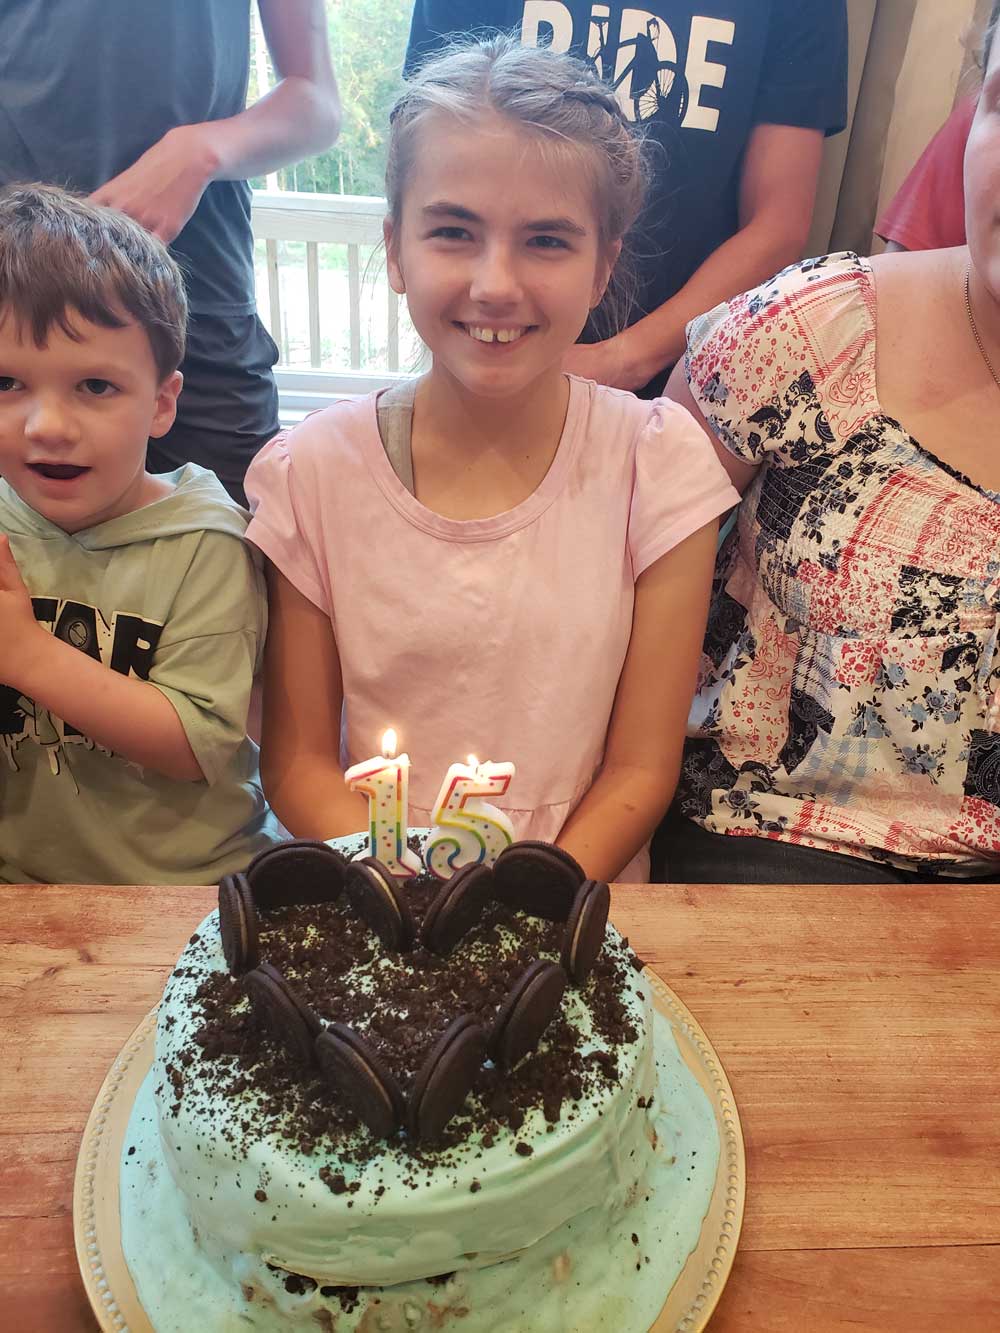 Yulia turned 15 on June 5 – just weeks after her transplant surgery.